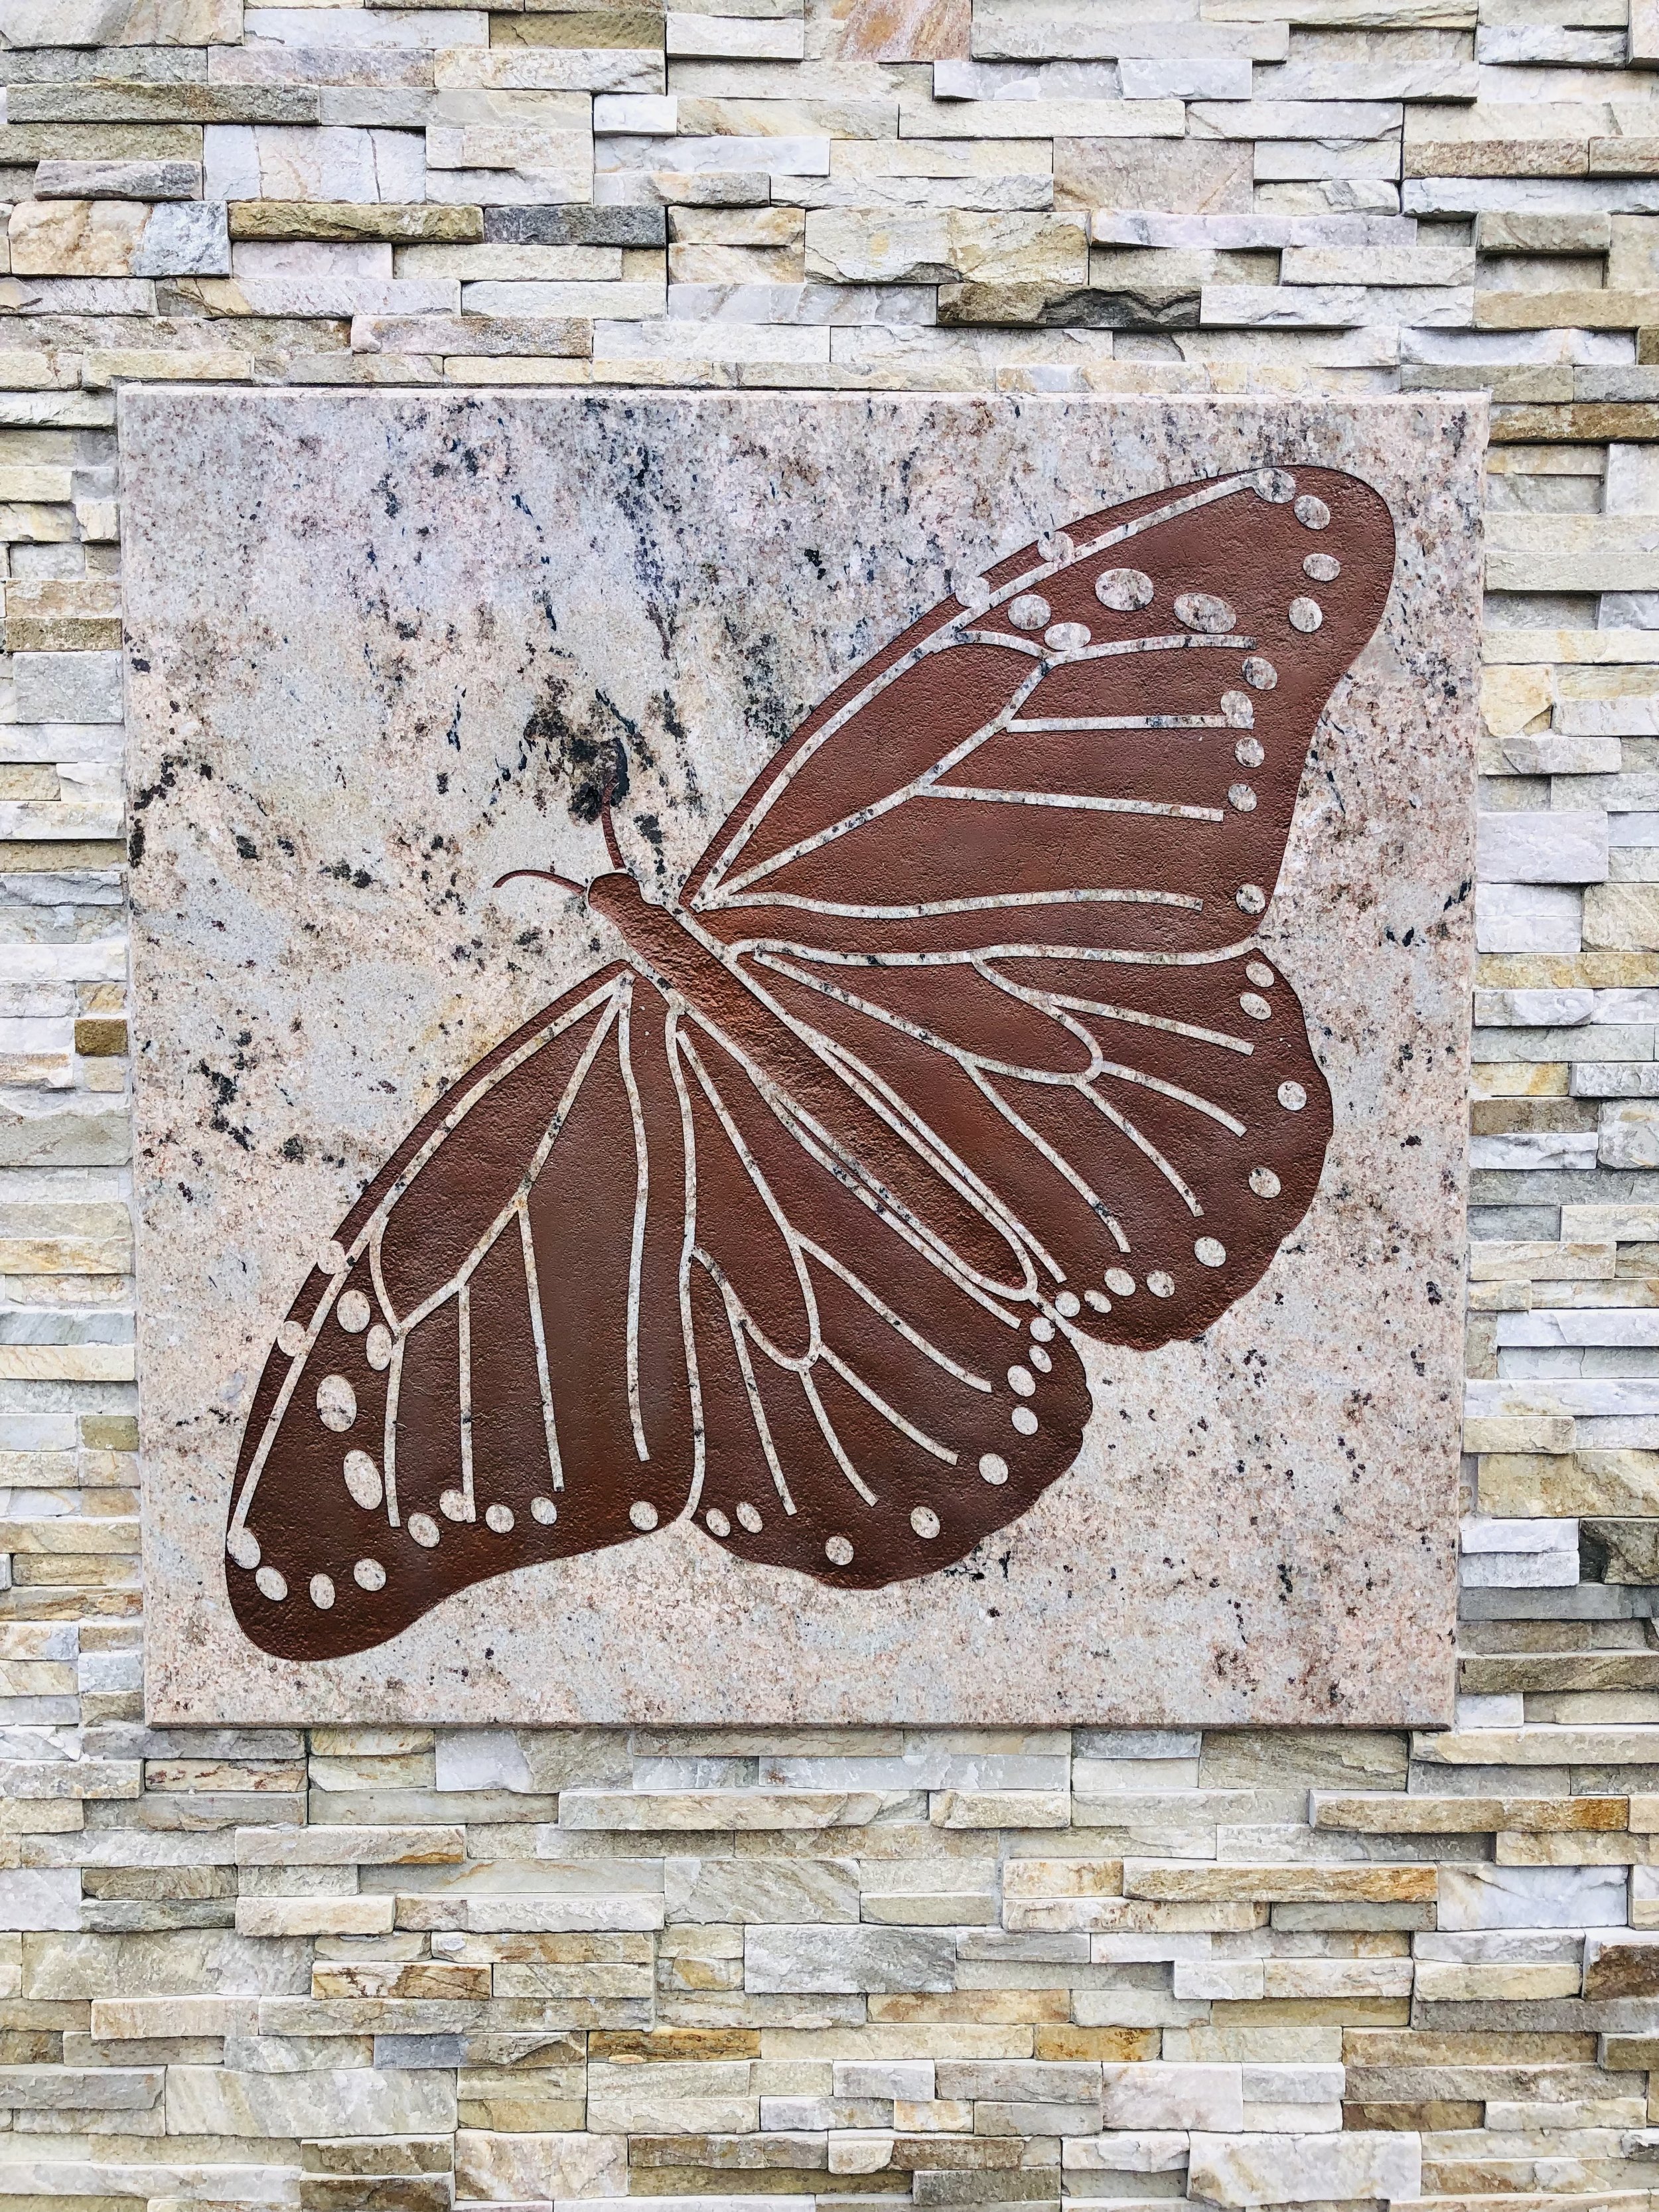 butterfly at the viana hotel and spa in westbury new york photo by laura cerrano of feng shui manhattan consultant.jpg